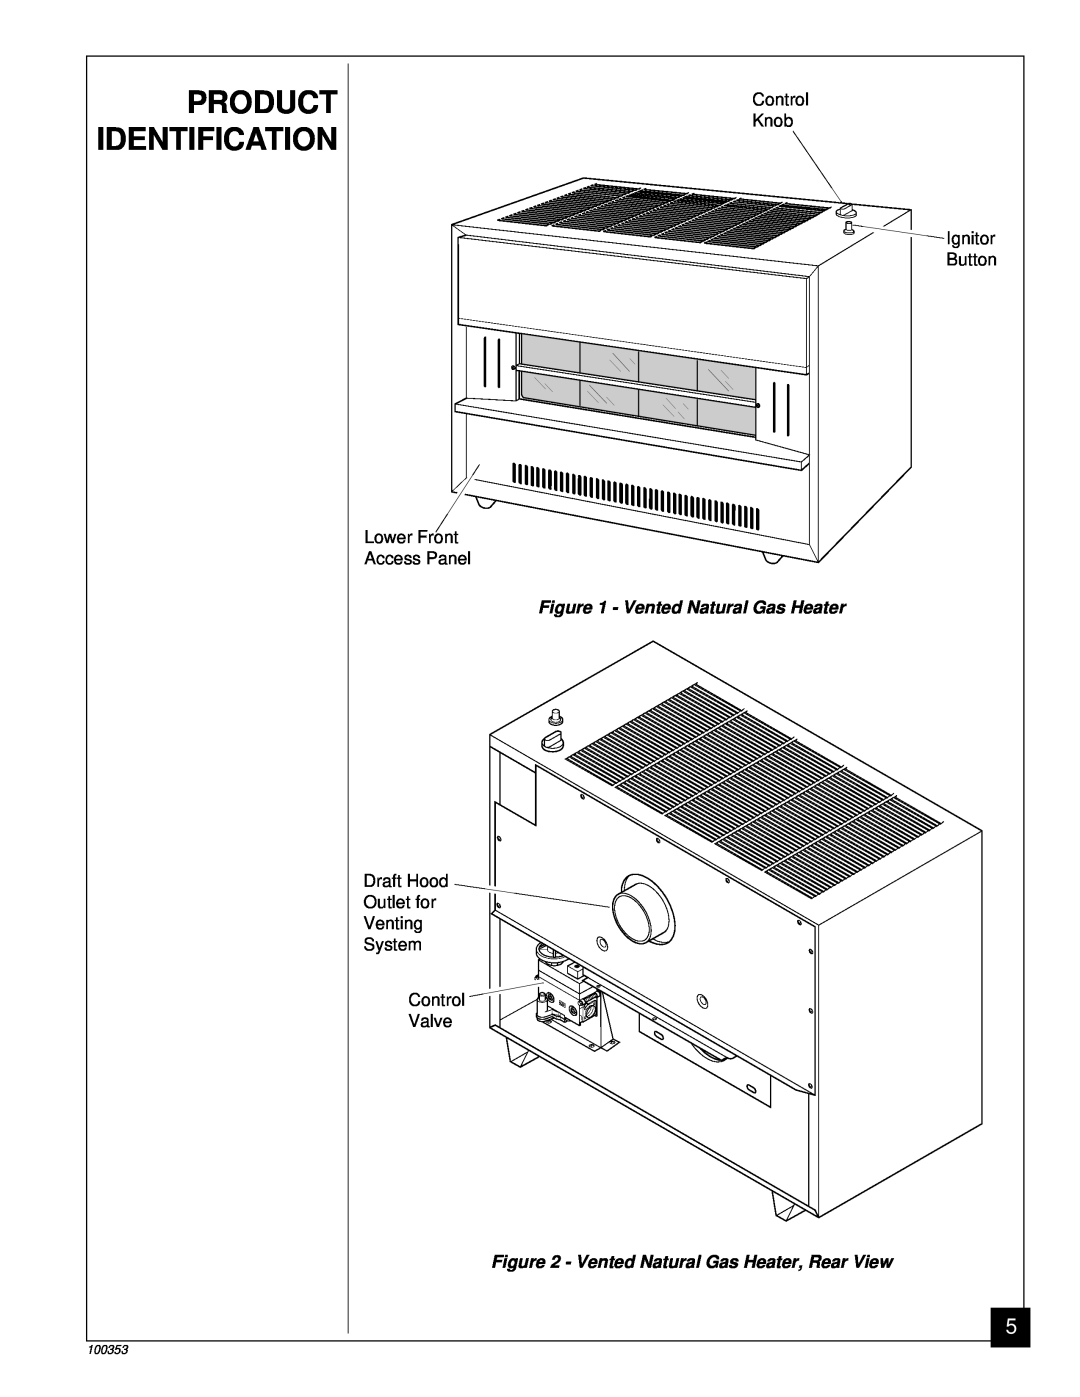 Desa GVB50N, GVB35N installation manual Product Identification, Vented Natural Gas Heater, Rear View, 100353 